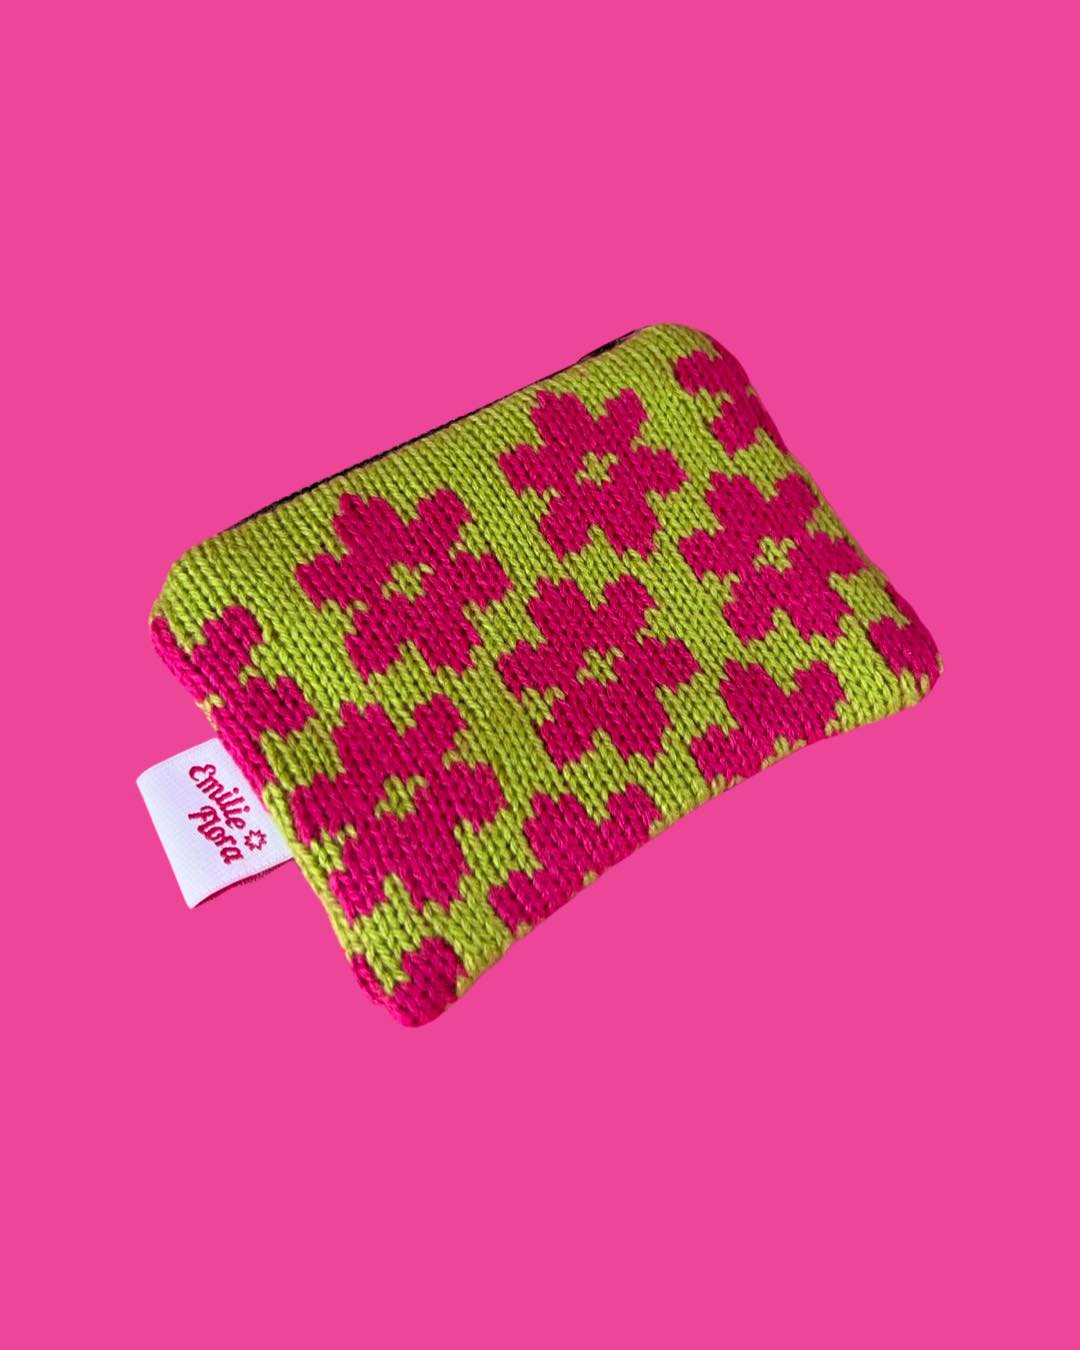 Mini Purse - Blossom, Lime and Hot Pink - READY TO SHIP